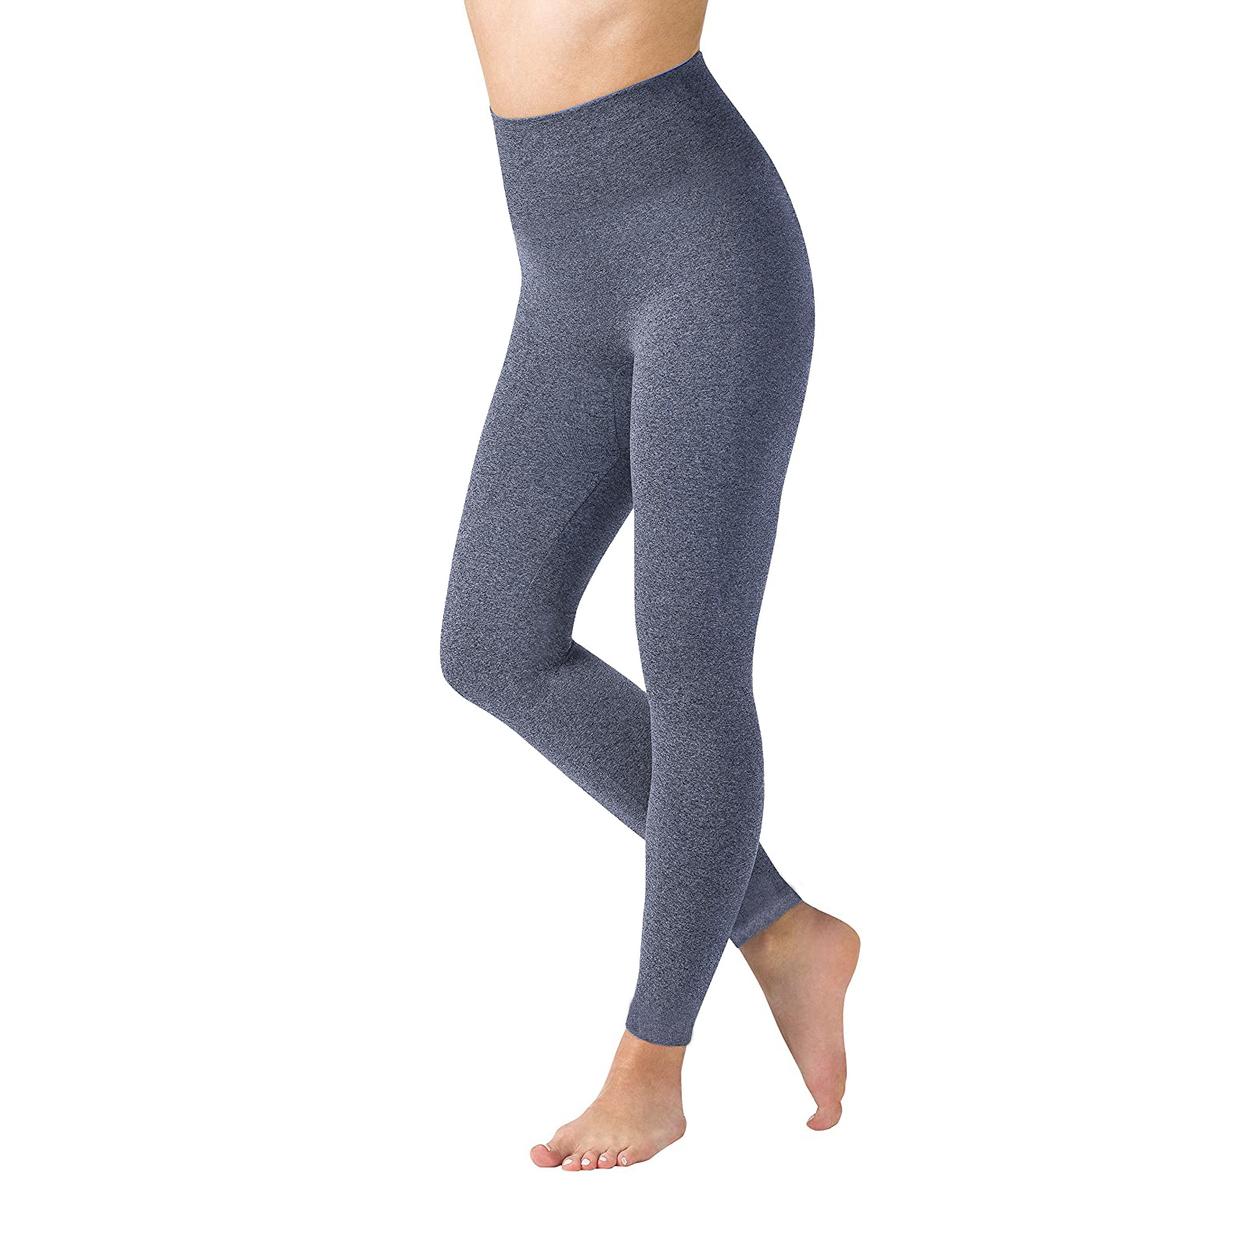 Women's High Waisted Ultra-Soft Fleece Lined Warm Marled Leggings(Available In Plus Sizes) - Charcoal, X-large